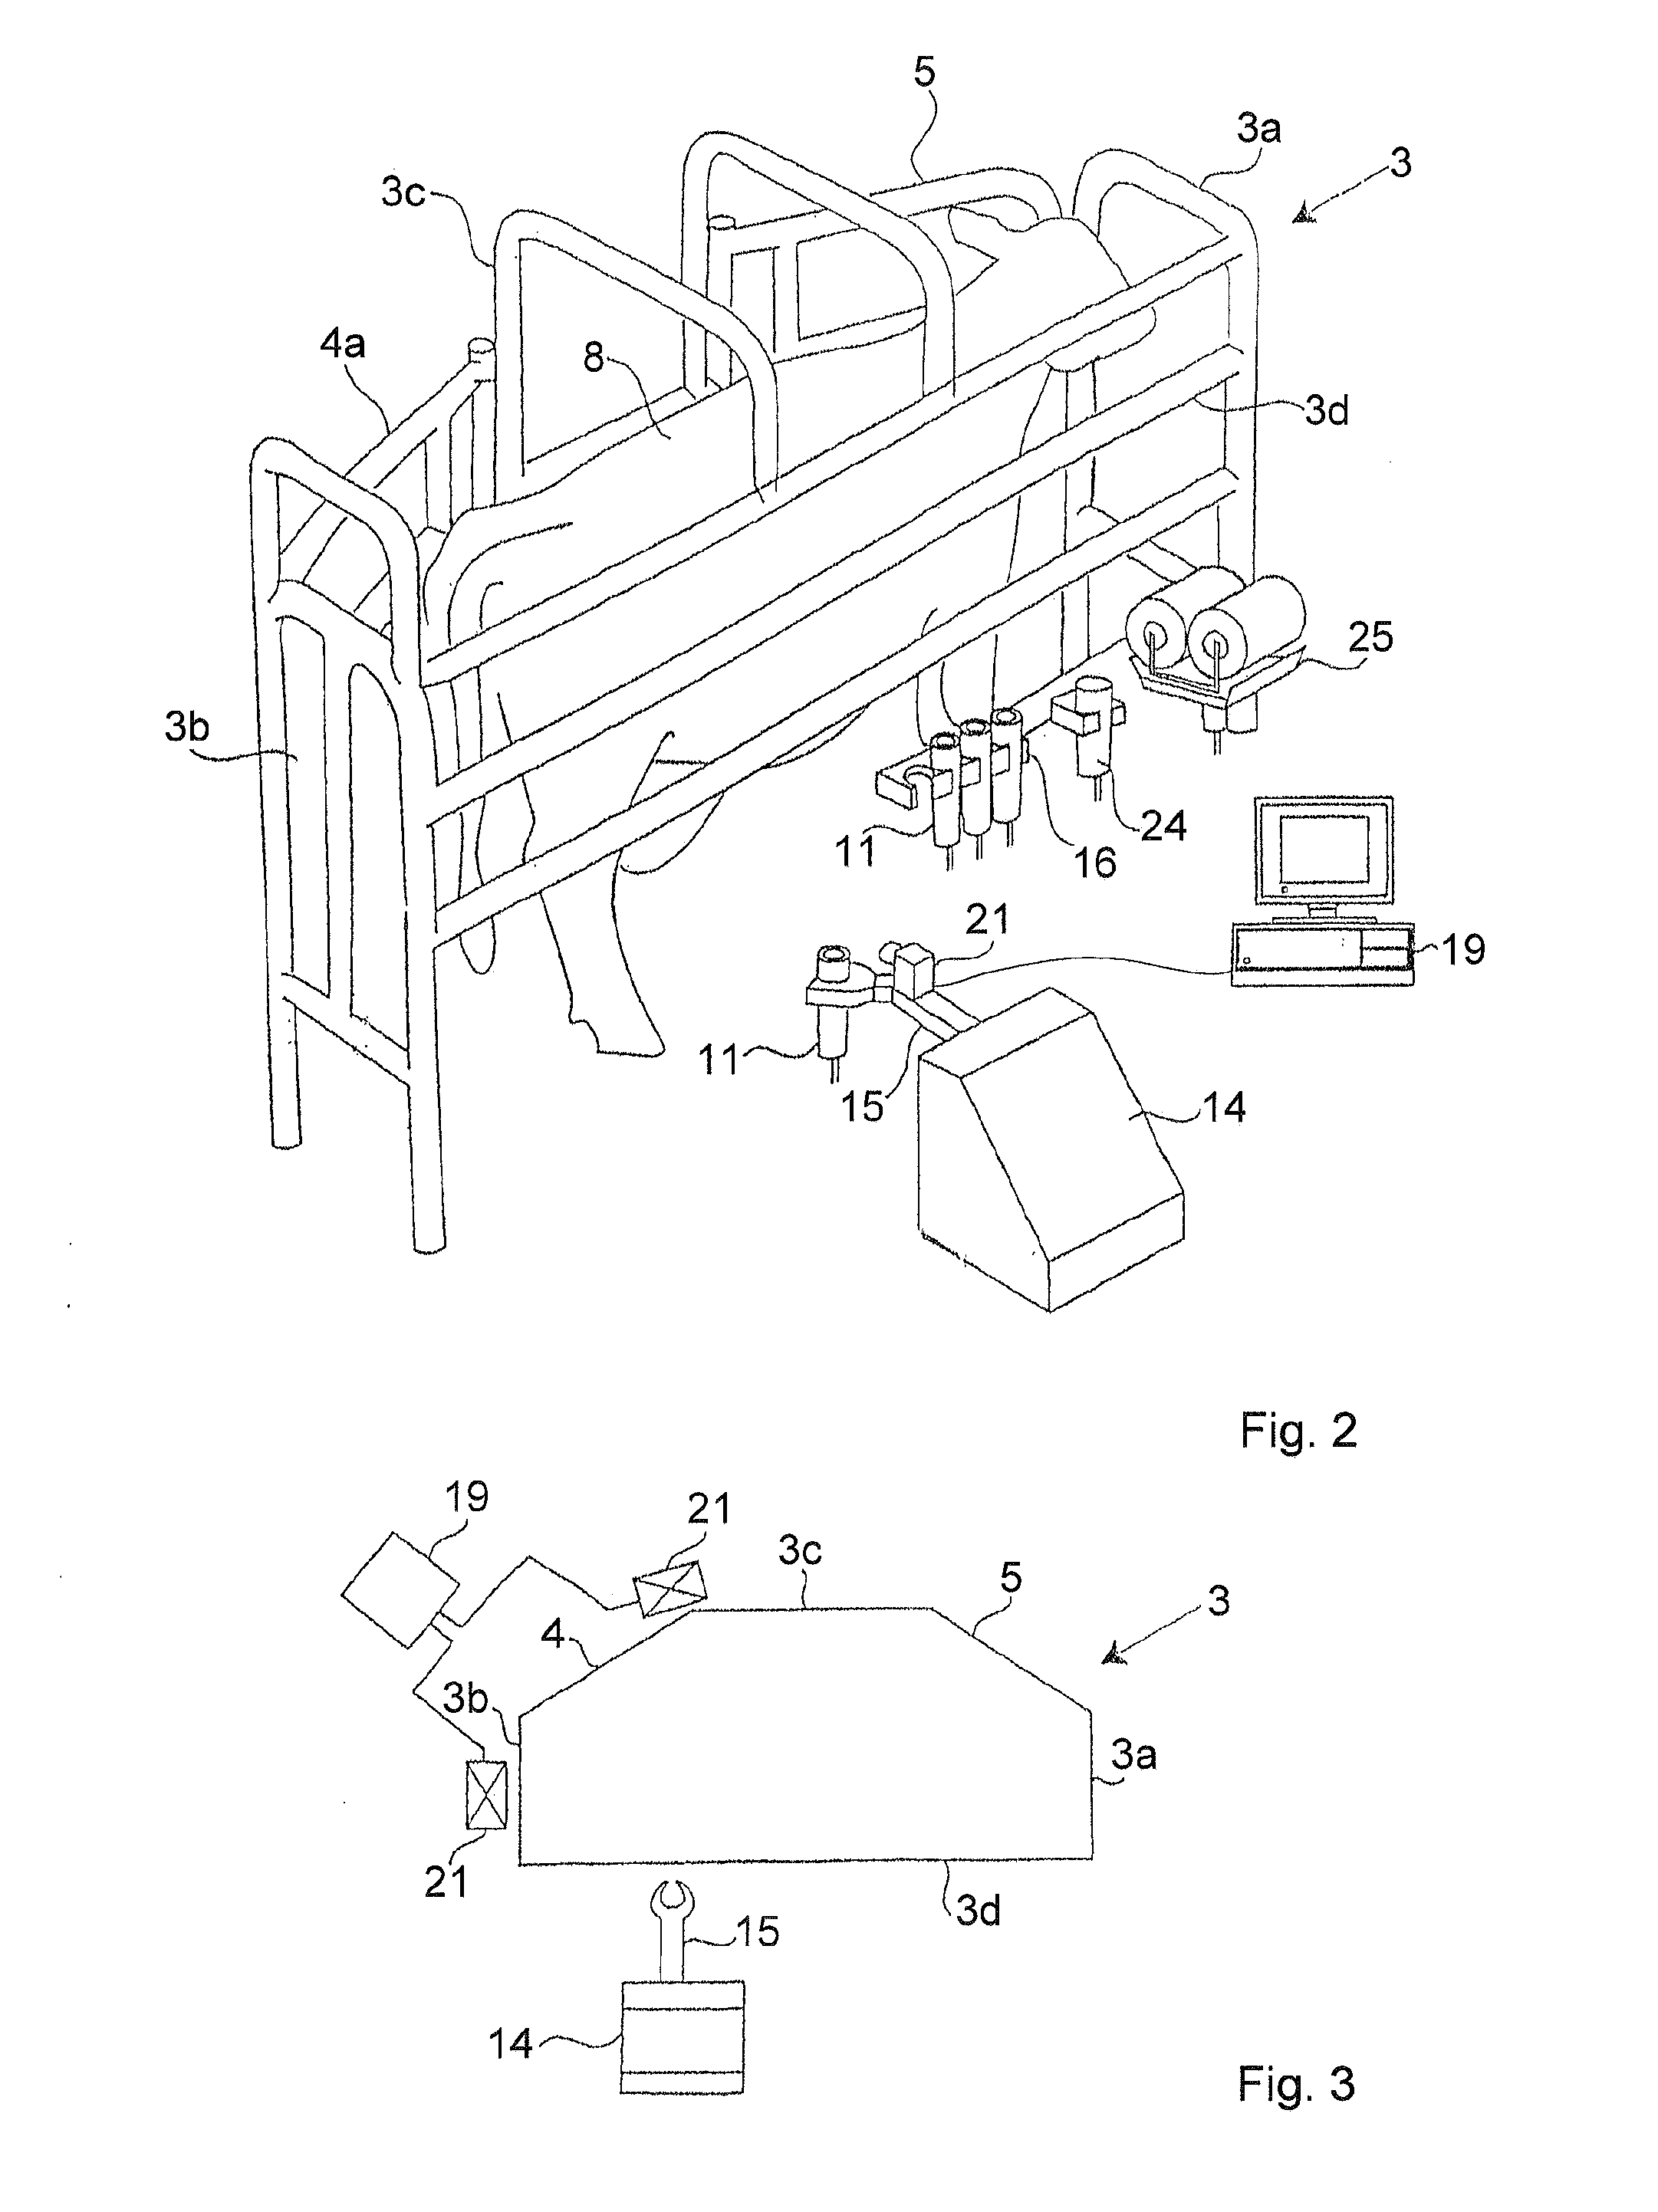 Arrangement and Method for Determining Positions of the Teats of A Milking Animal